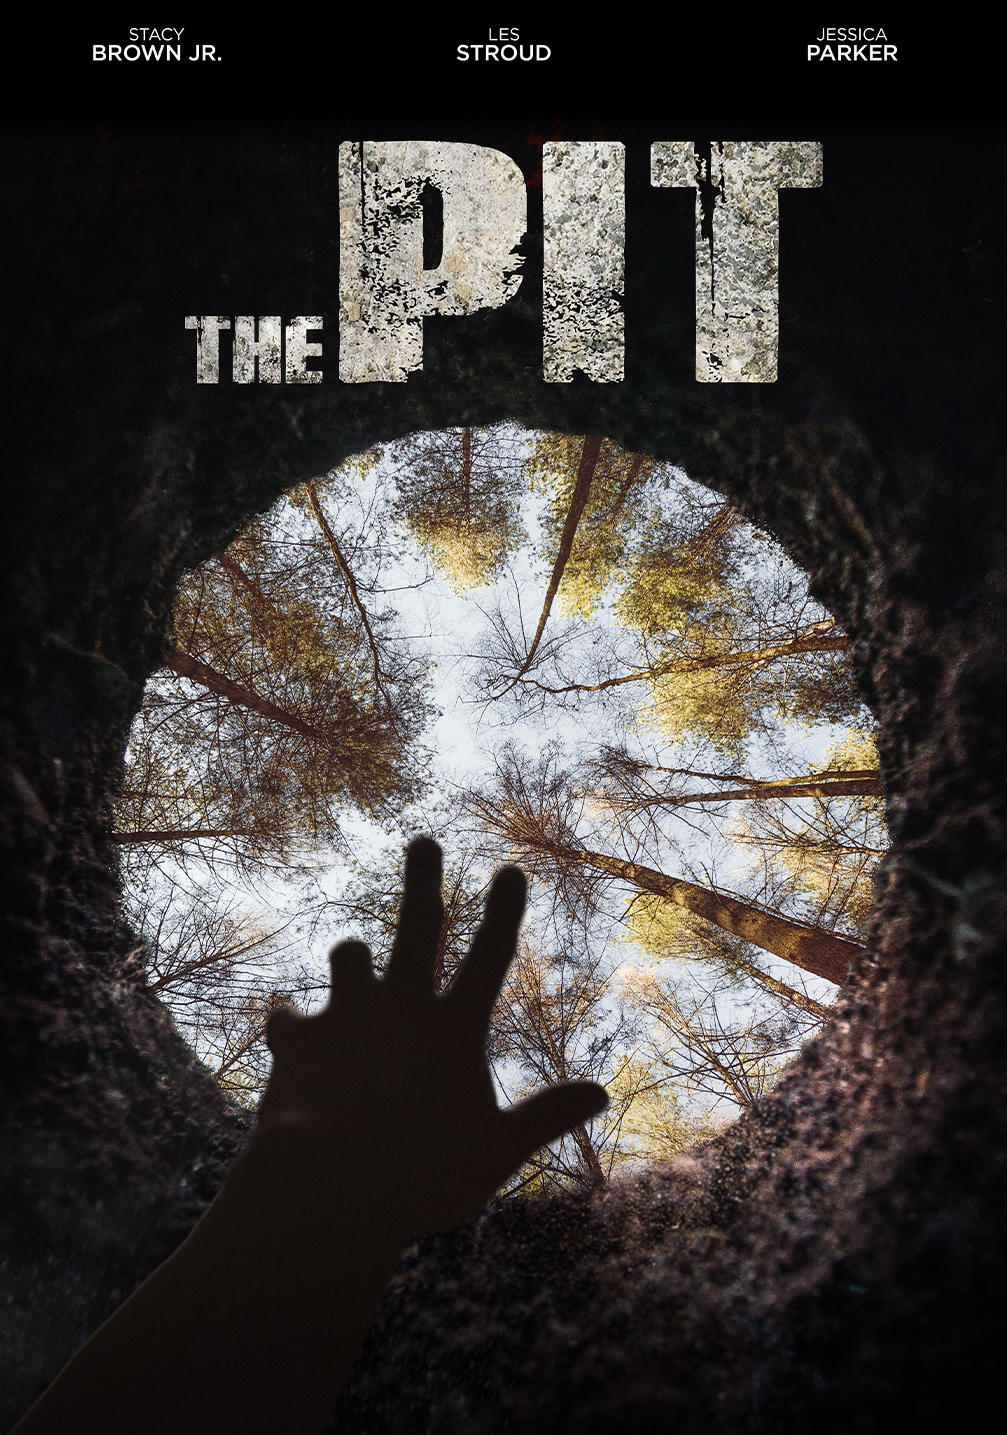 THE PIT now available on VOD from Midnight Releasing HNN